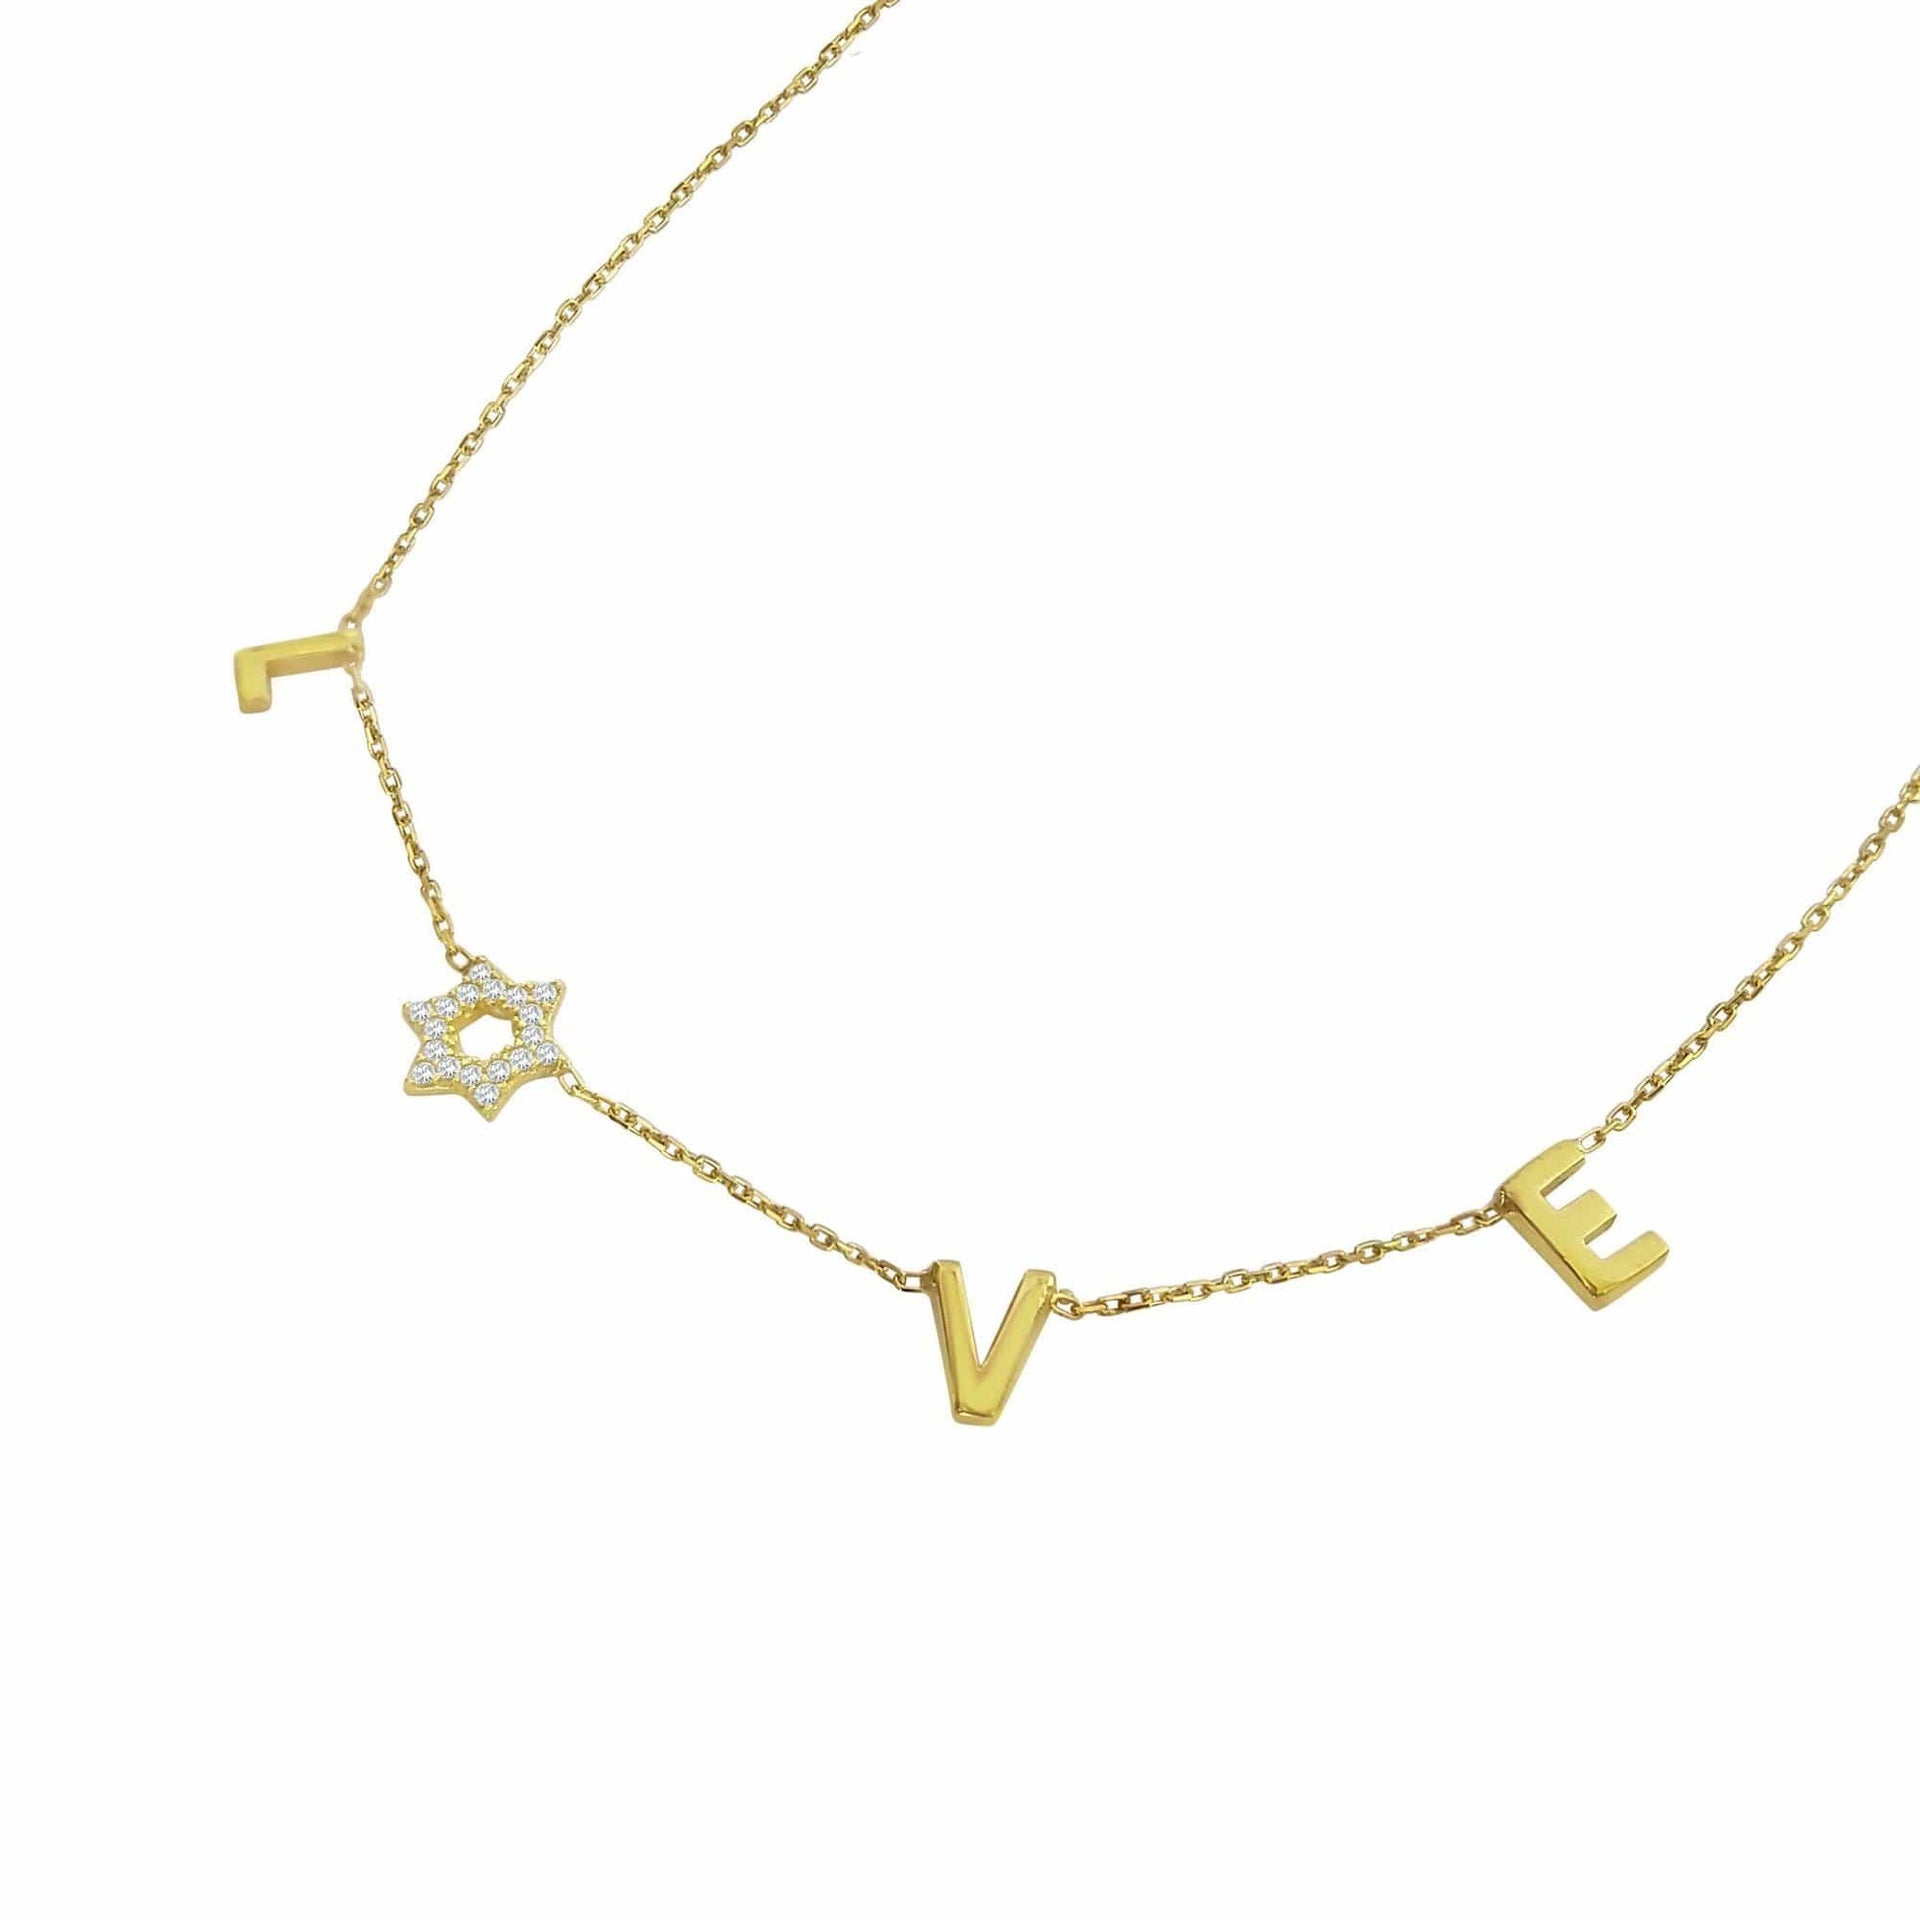 Alef Bet Necklaces Love Necklace with a Sparkling Star of David - Silver, Gold or Rose Gold